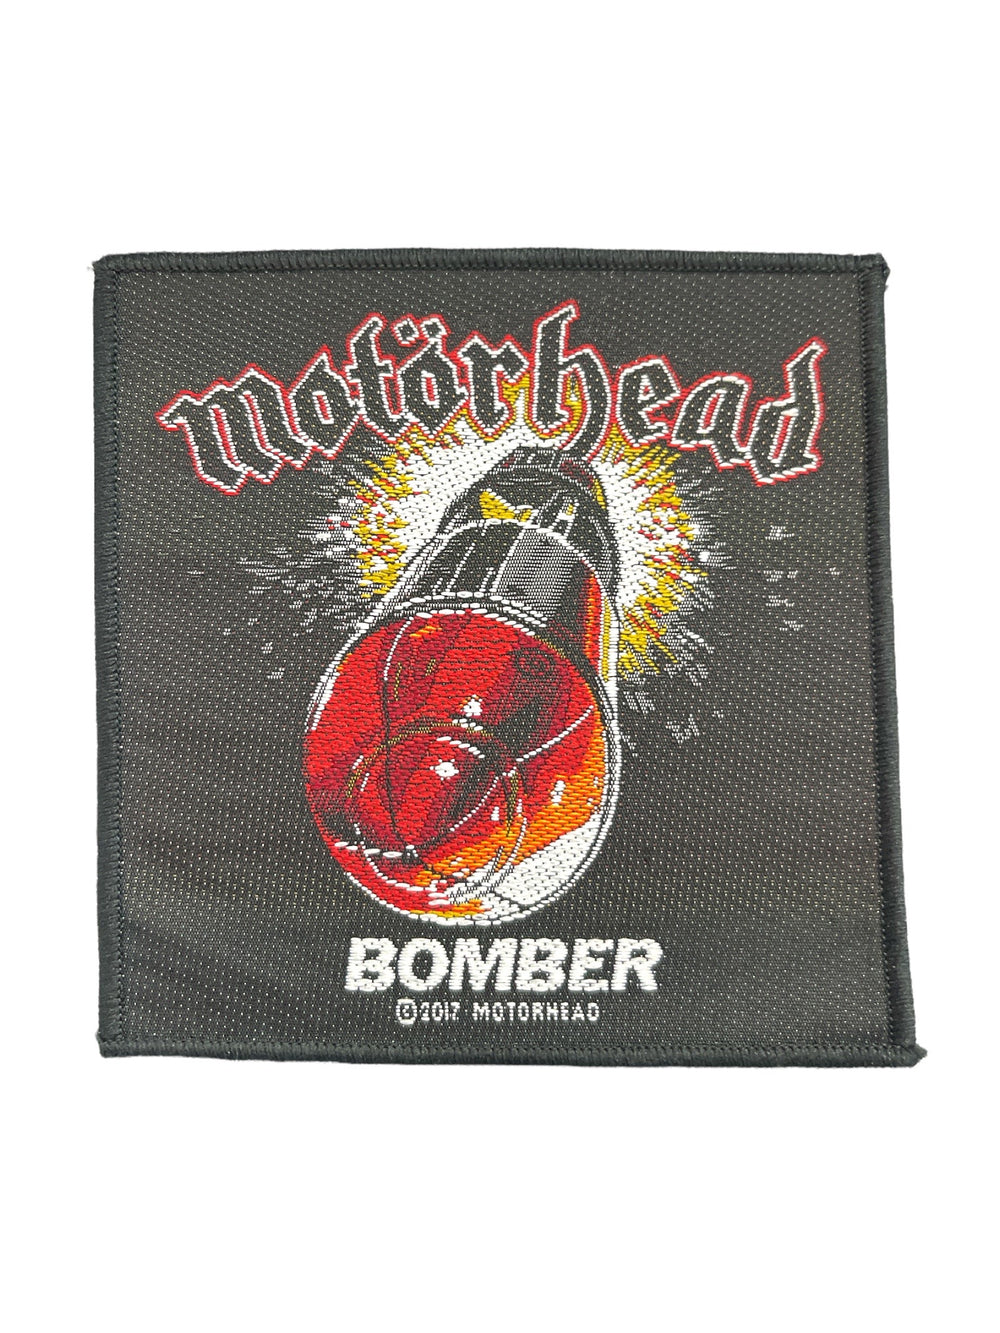 Motorhead Bomber Official Woven Patch Brand New